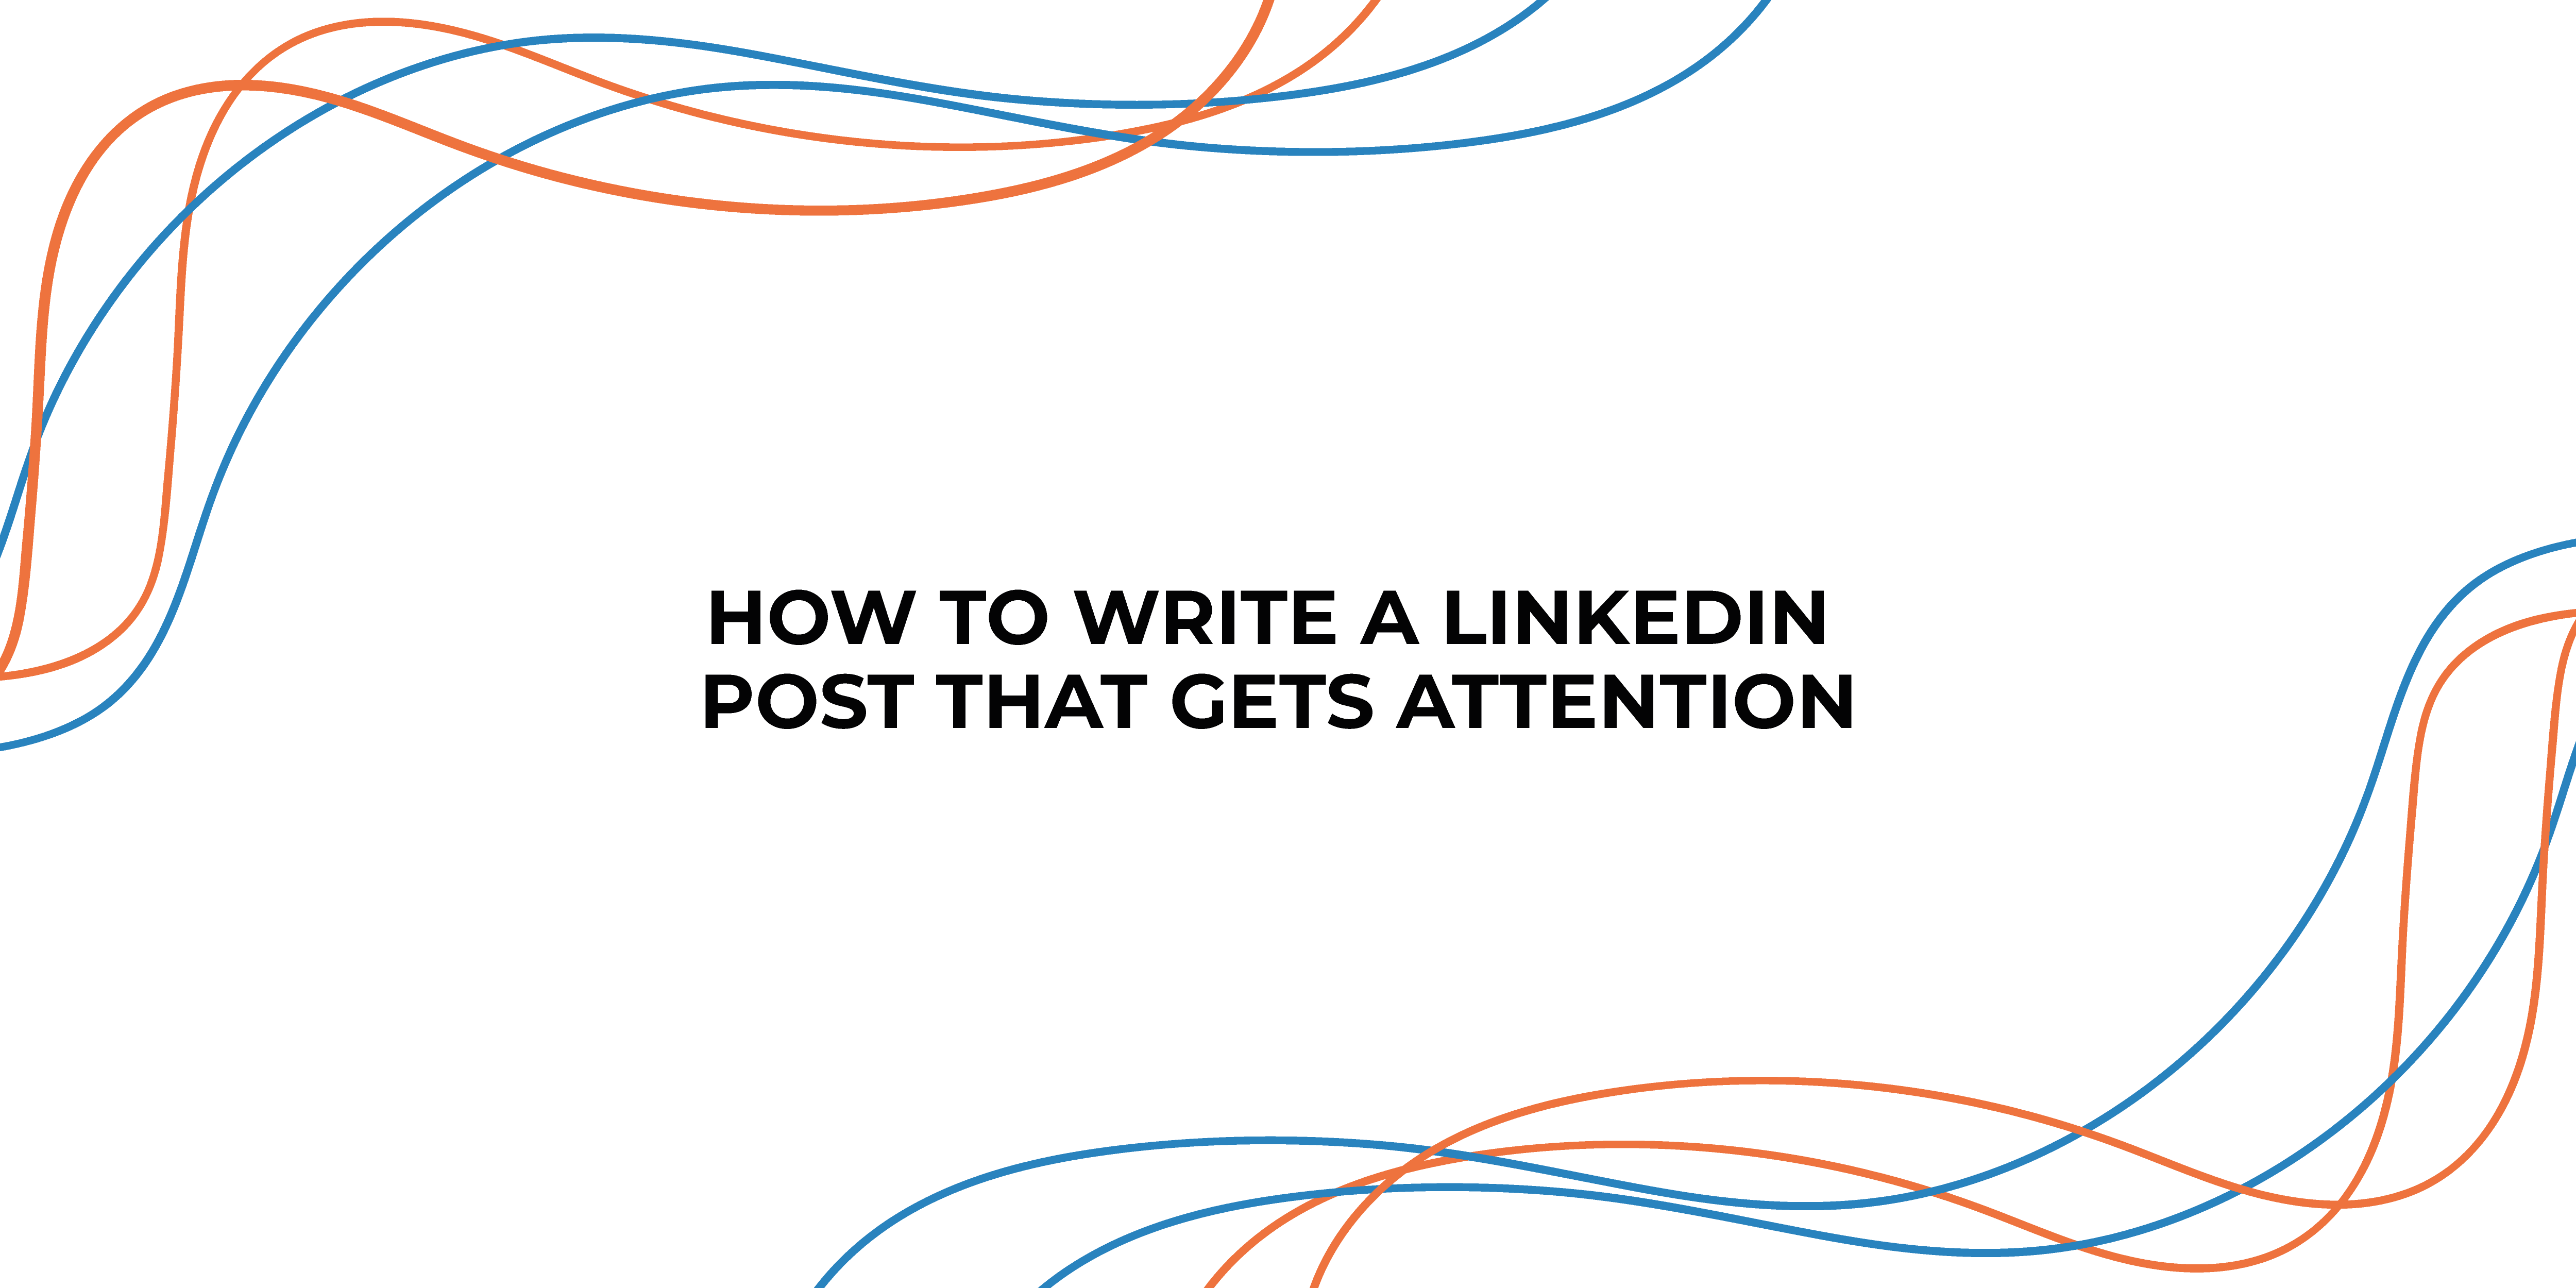 How To Write A LinkedIn Post That Gets Attention